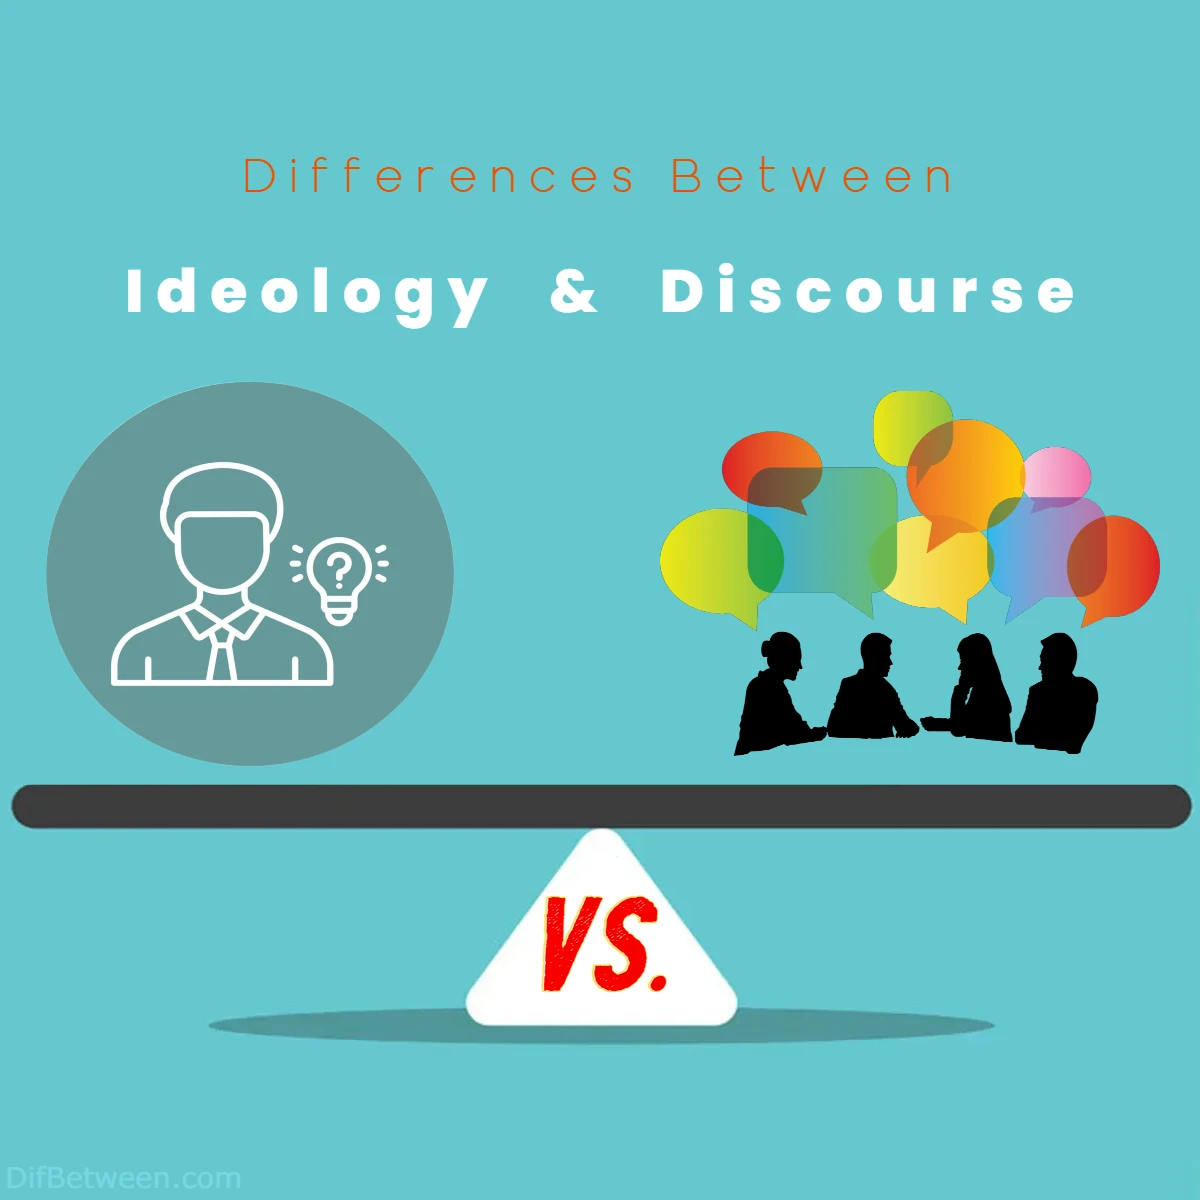 Differences Between Ideology vs Discourse